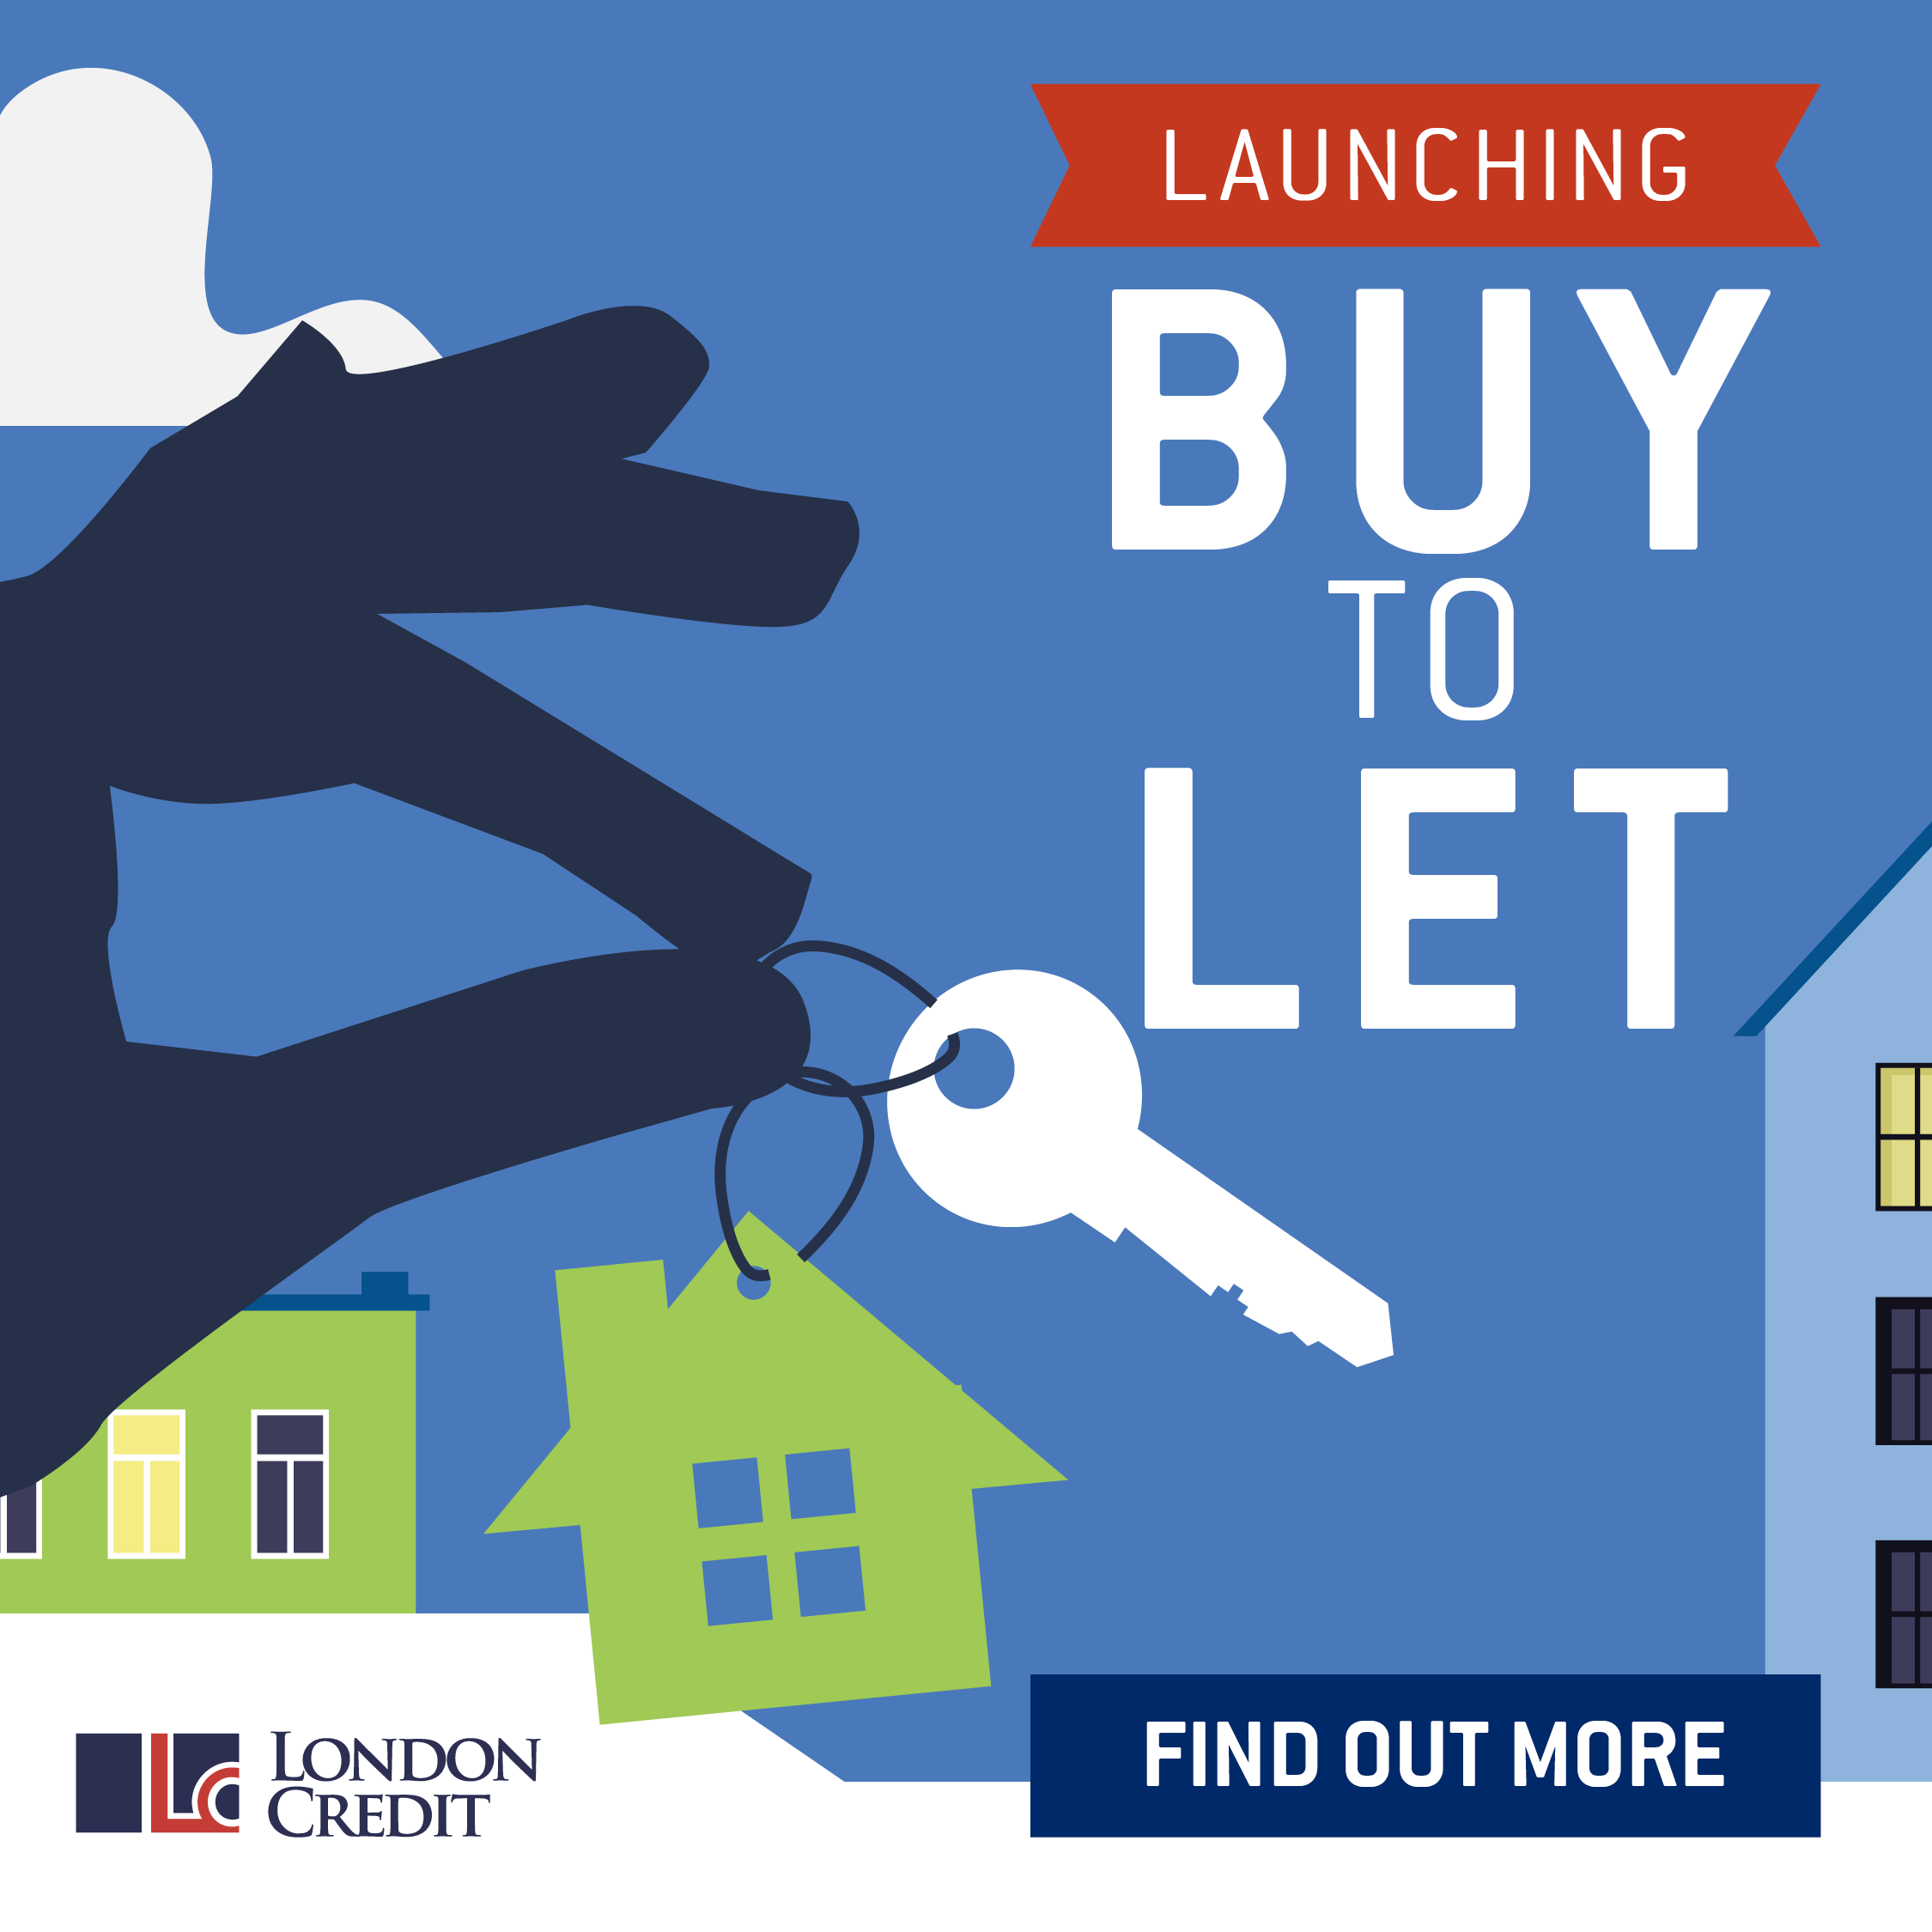 London Credit launches buy to let product